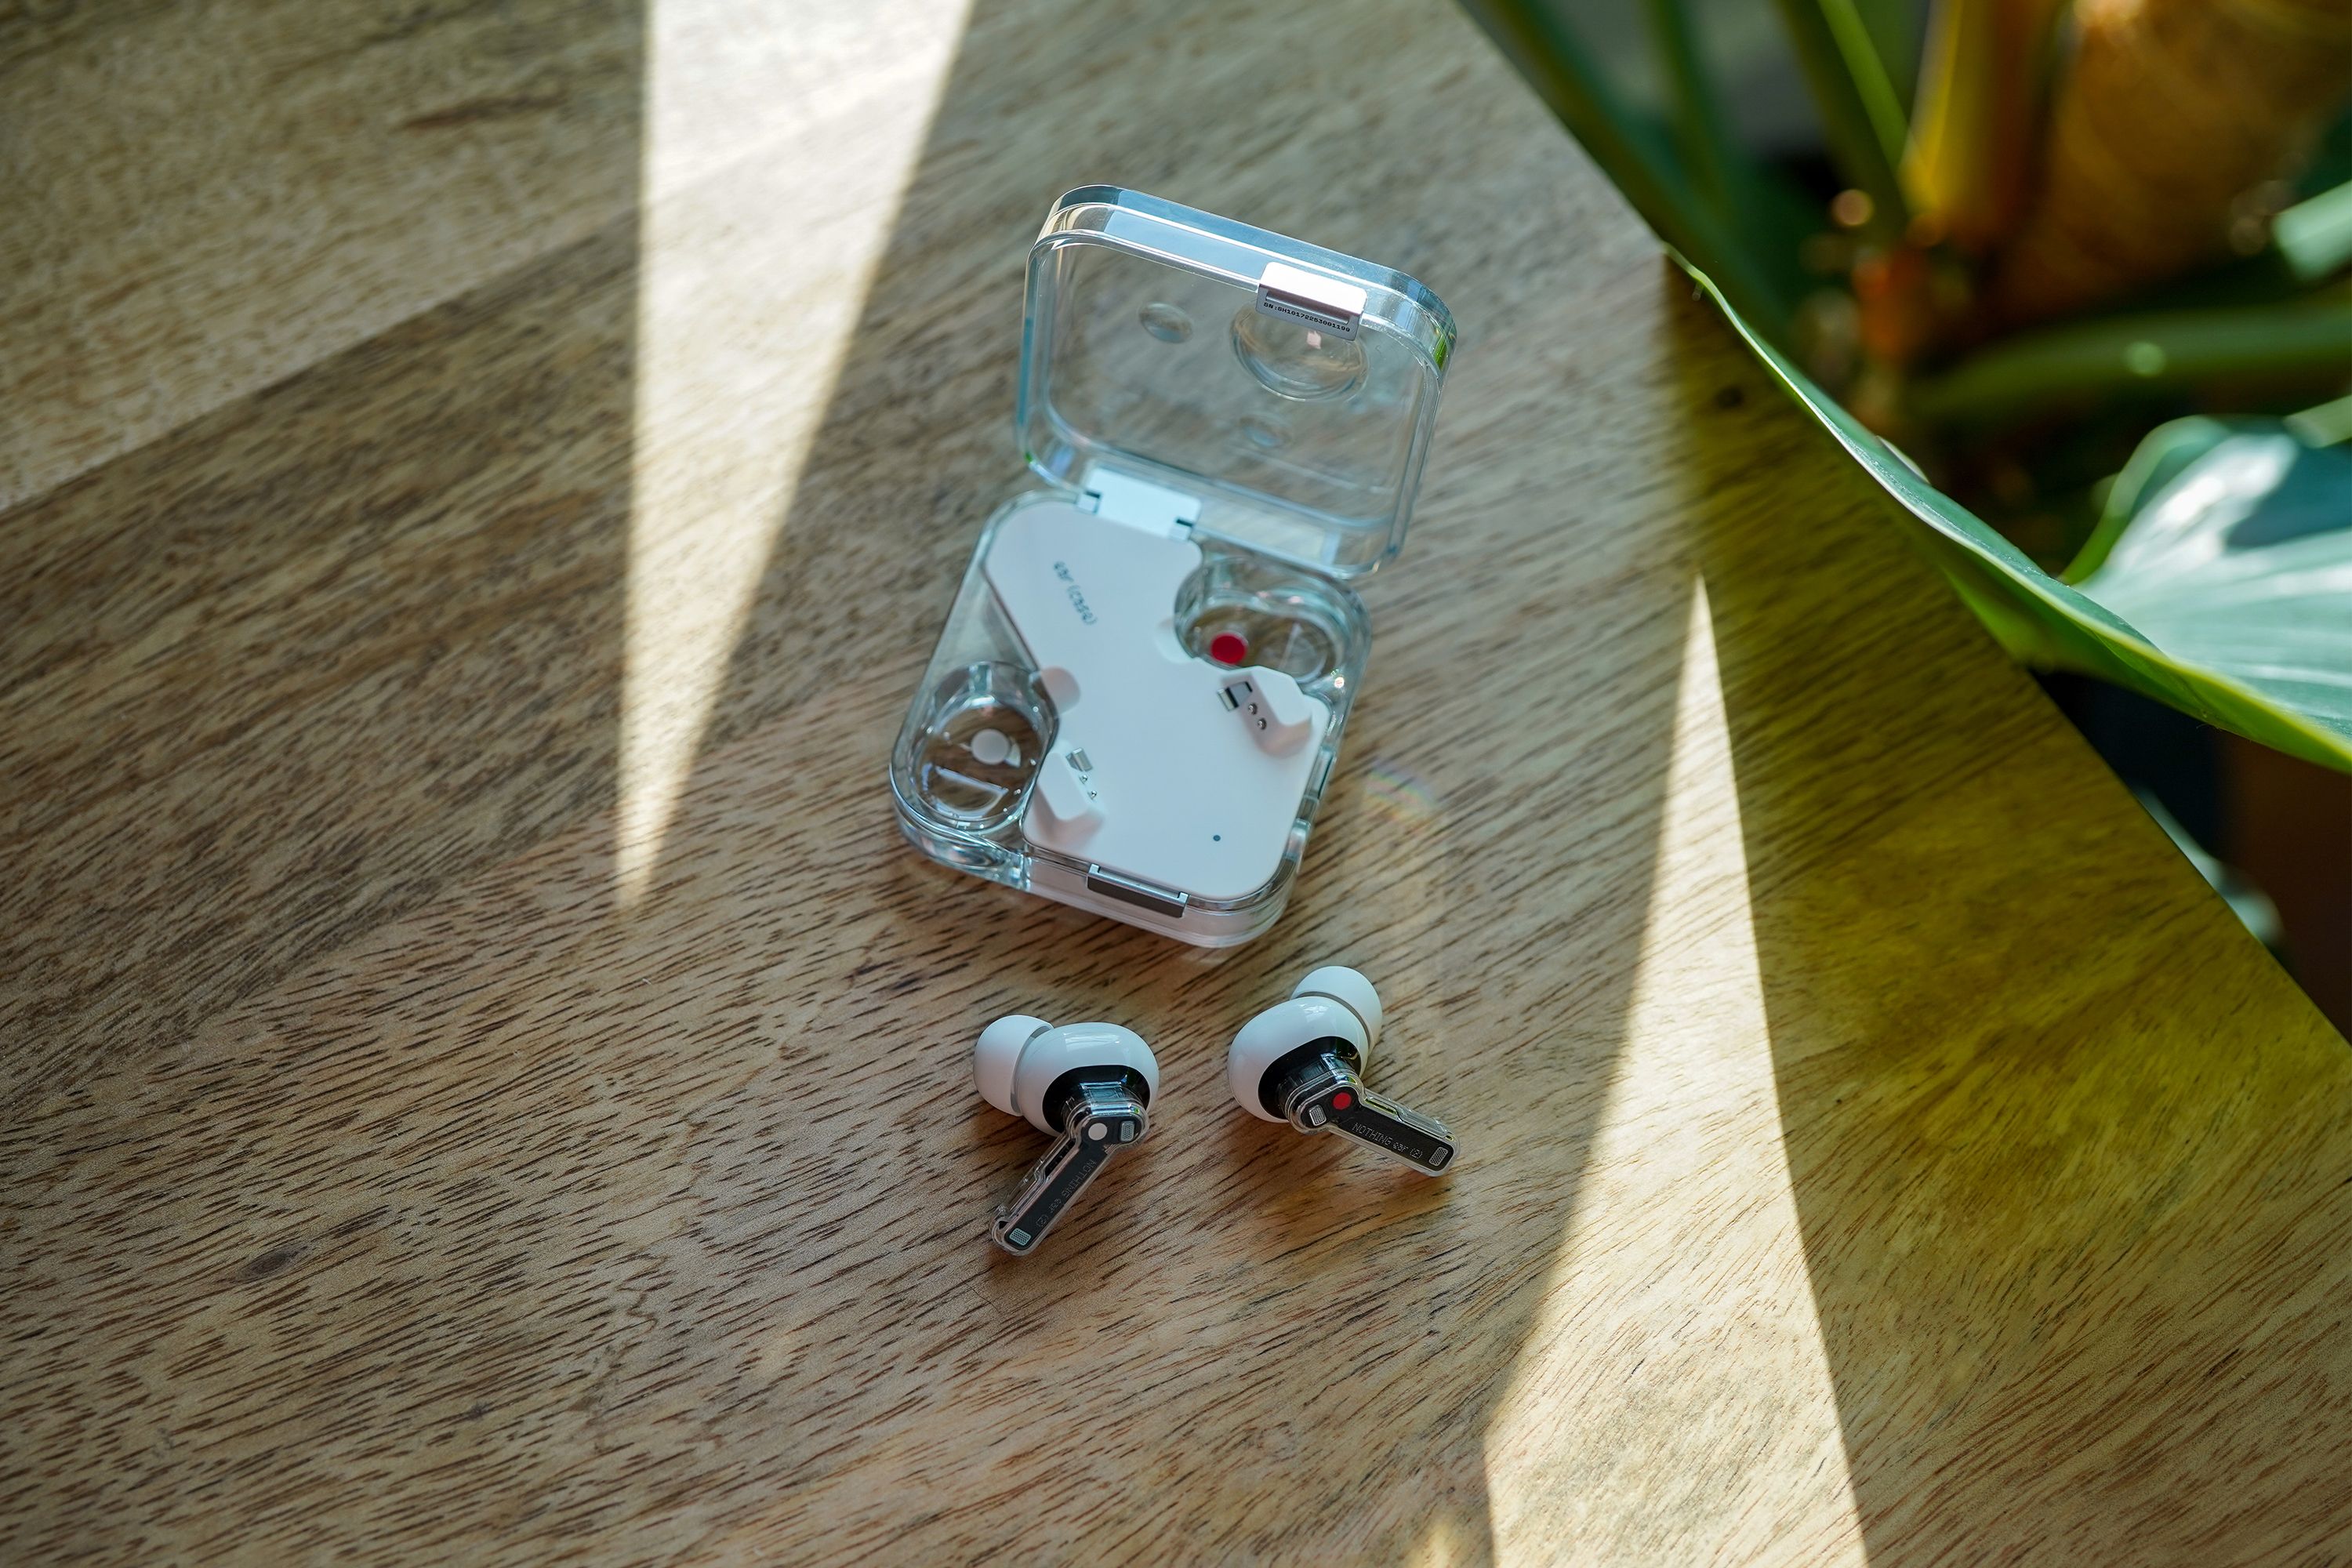 Nothing Ear (2) Earbuds Review: Is Looking Cool Still Enough?